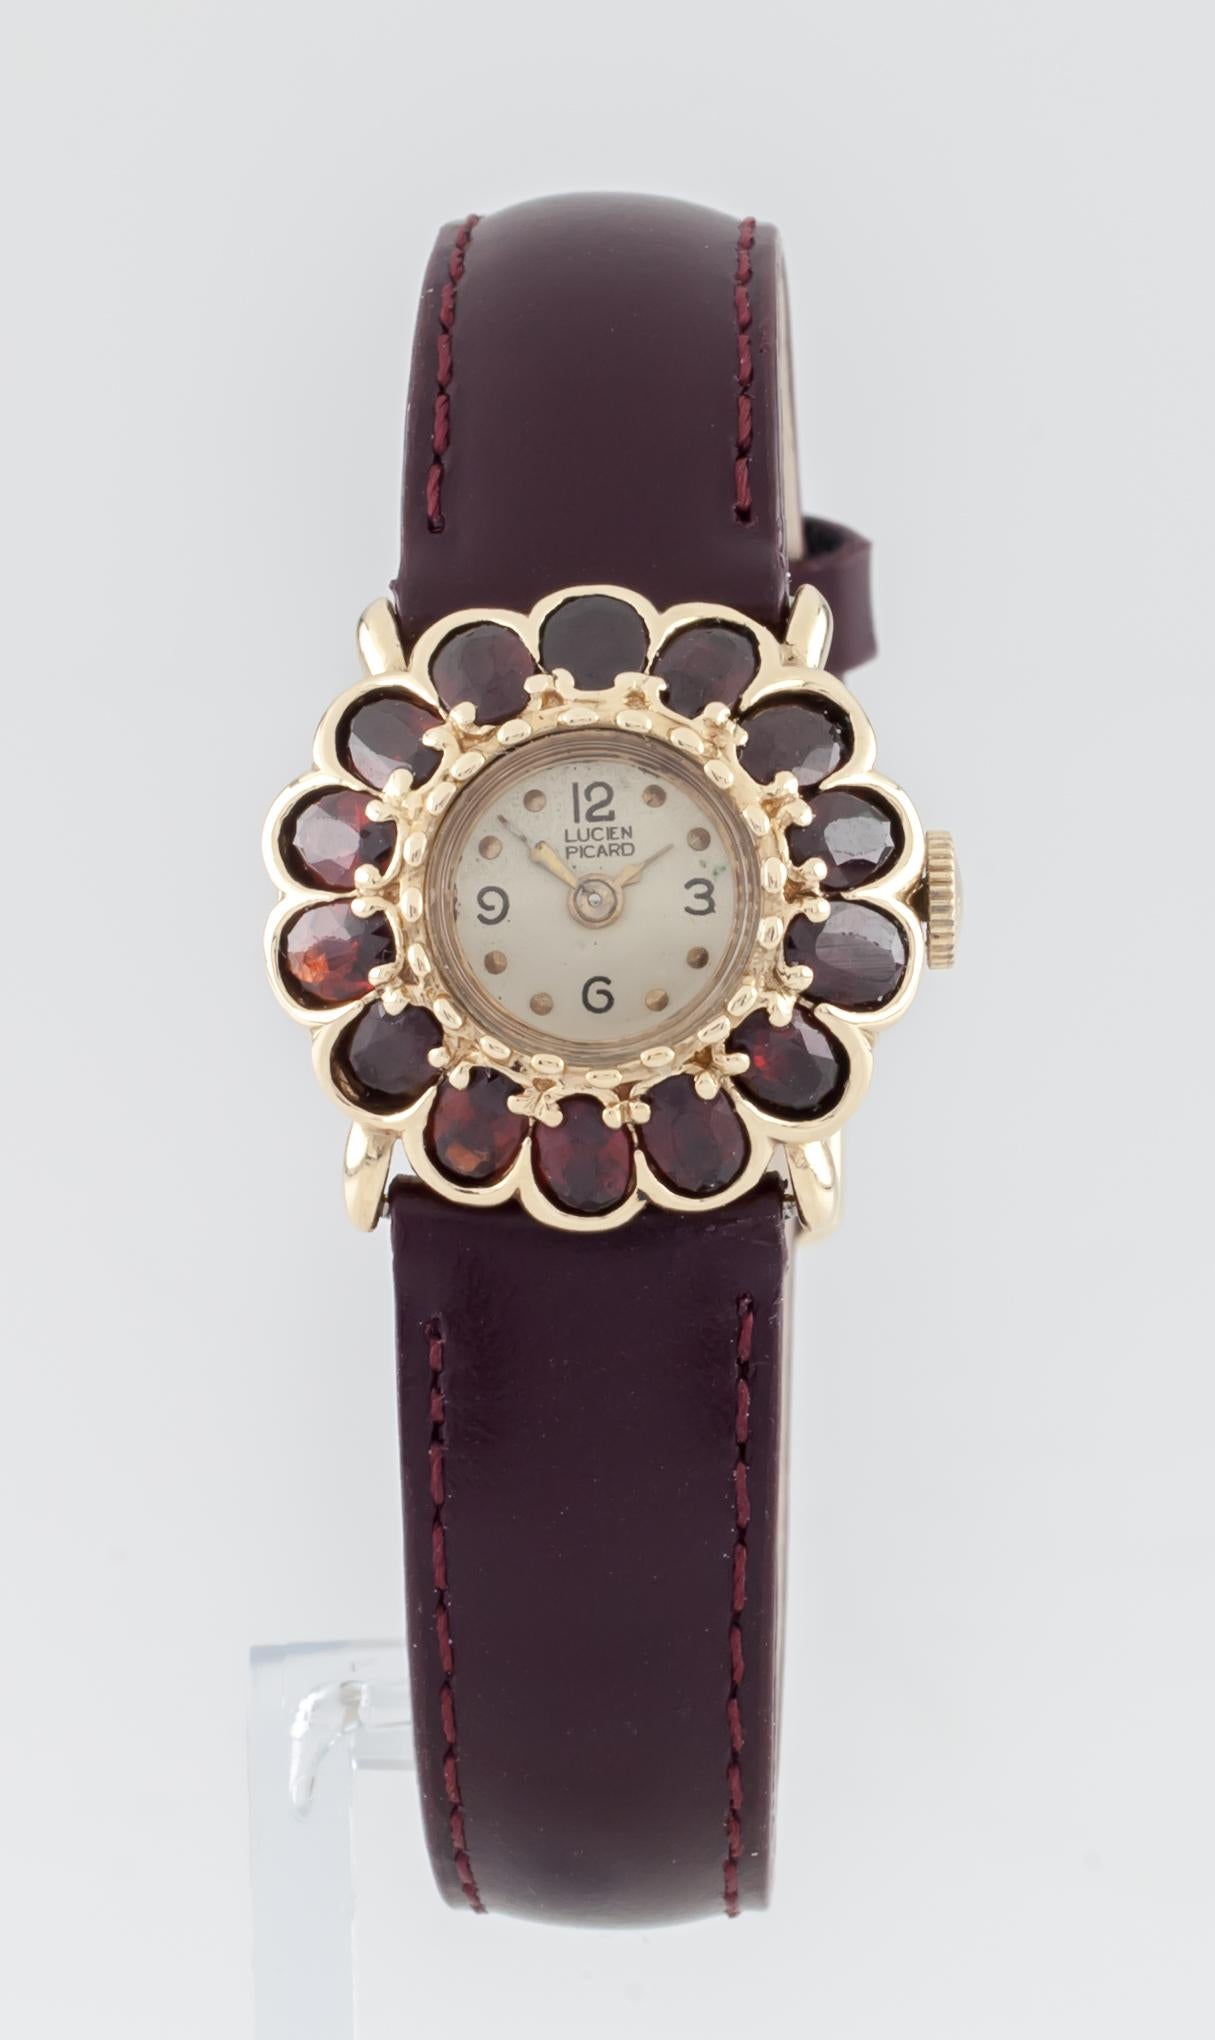 Movement #A5976
Serial #43591
Case #A03077
14k Yellow Gold Case w/ Garnet Flower Bezel
24 mm in diameter including garnet petals
Lug-to-Lug Length = 21 mm 
Lug-to-Lug Width = 16 mm
Thickness = 9 mm
Champagne Colored Dial w/ Gold Hands
Labeled